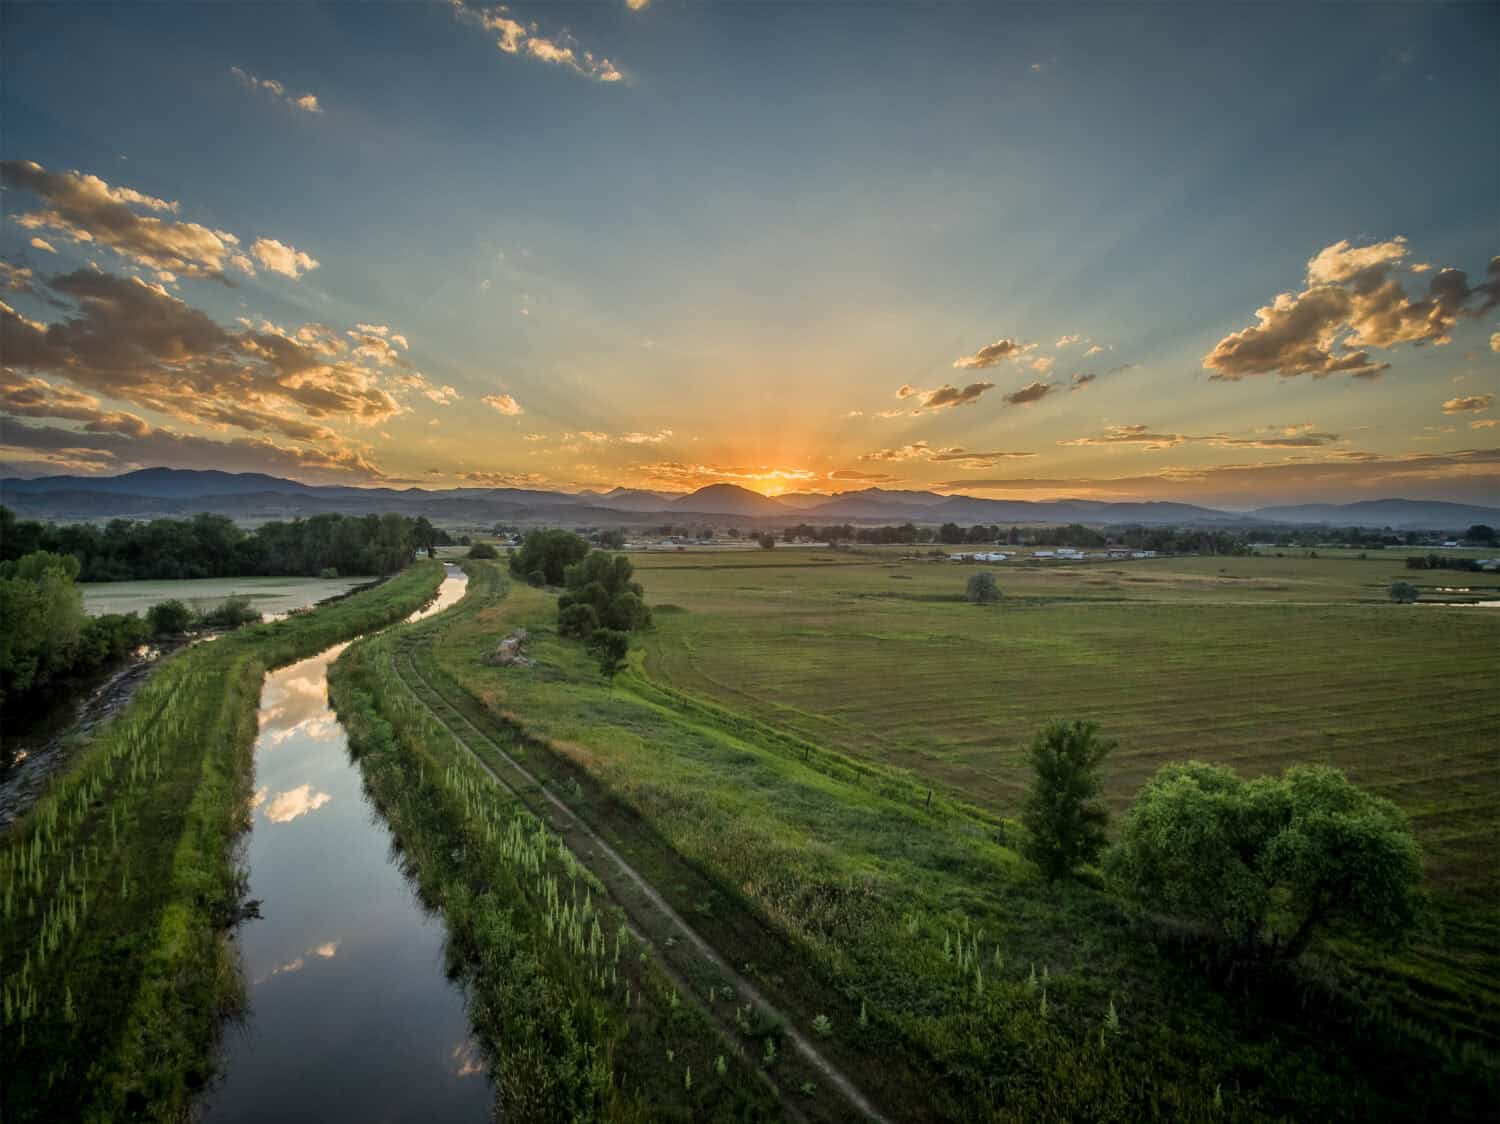 sunset over Rocky Mountains and foothills with an irrigation ditch - aerial view, northern Colorado near Loveland